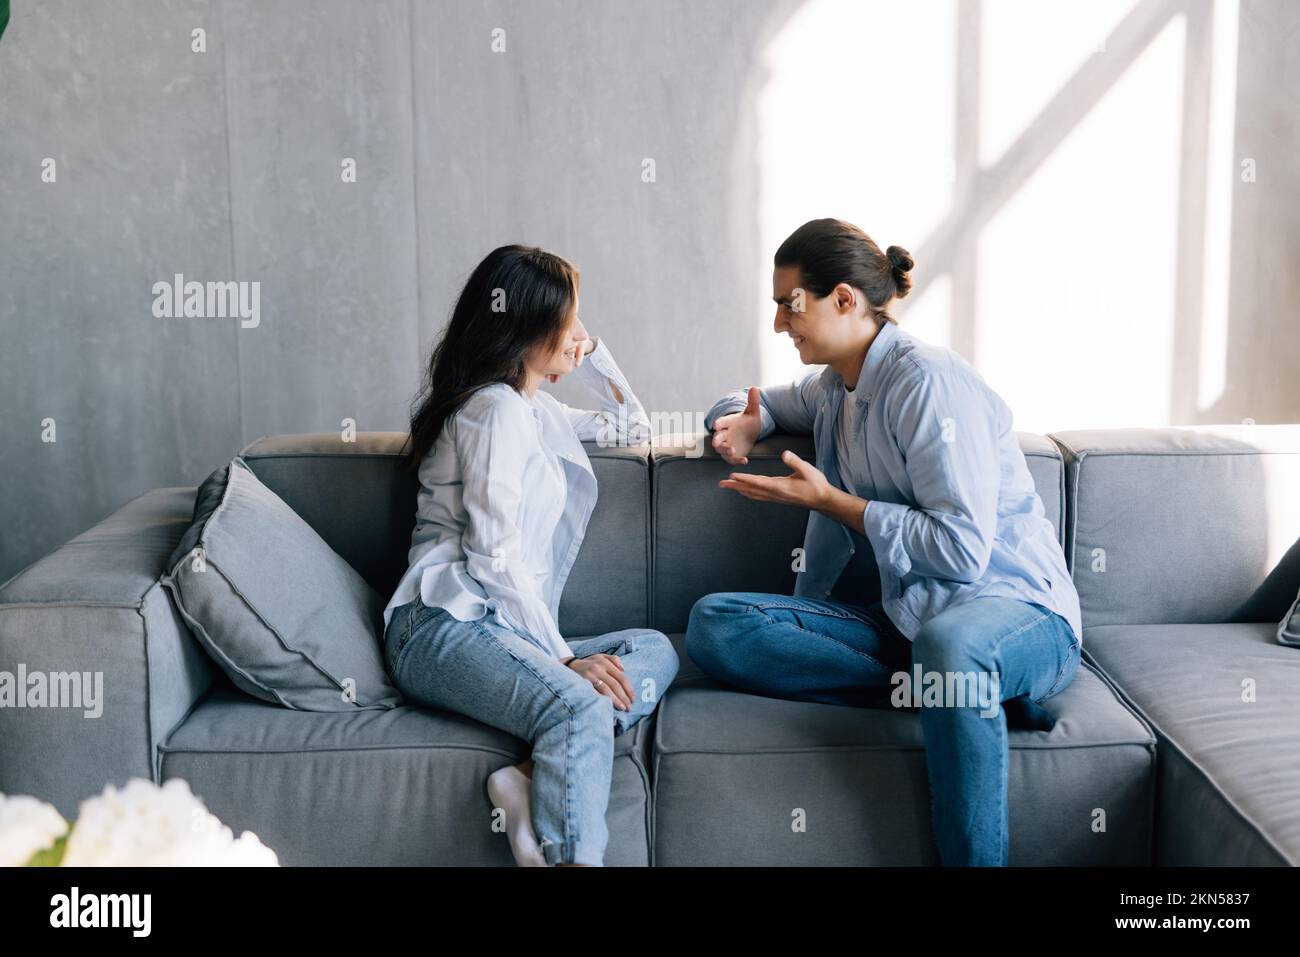 Man and young woman sitting on a couch and talk. Stock Photo